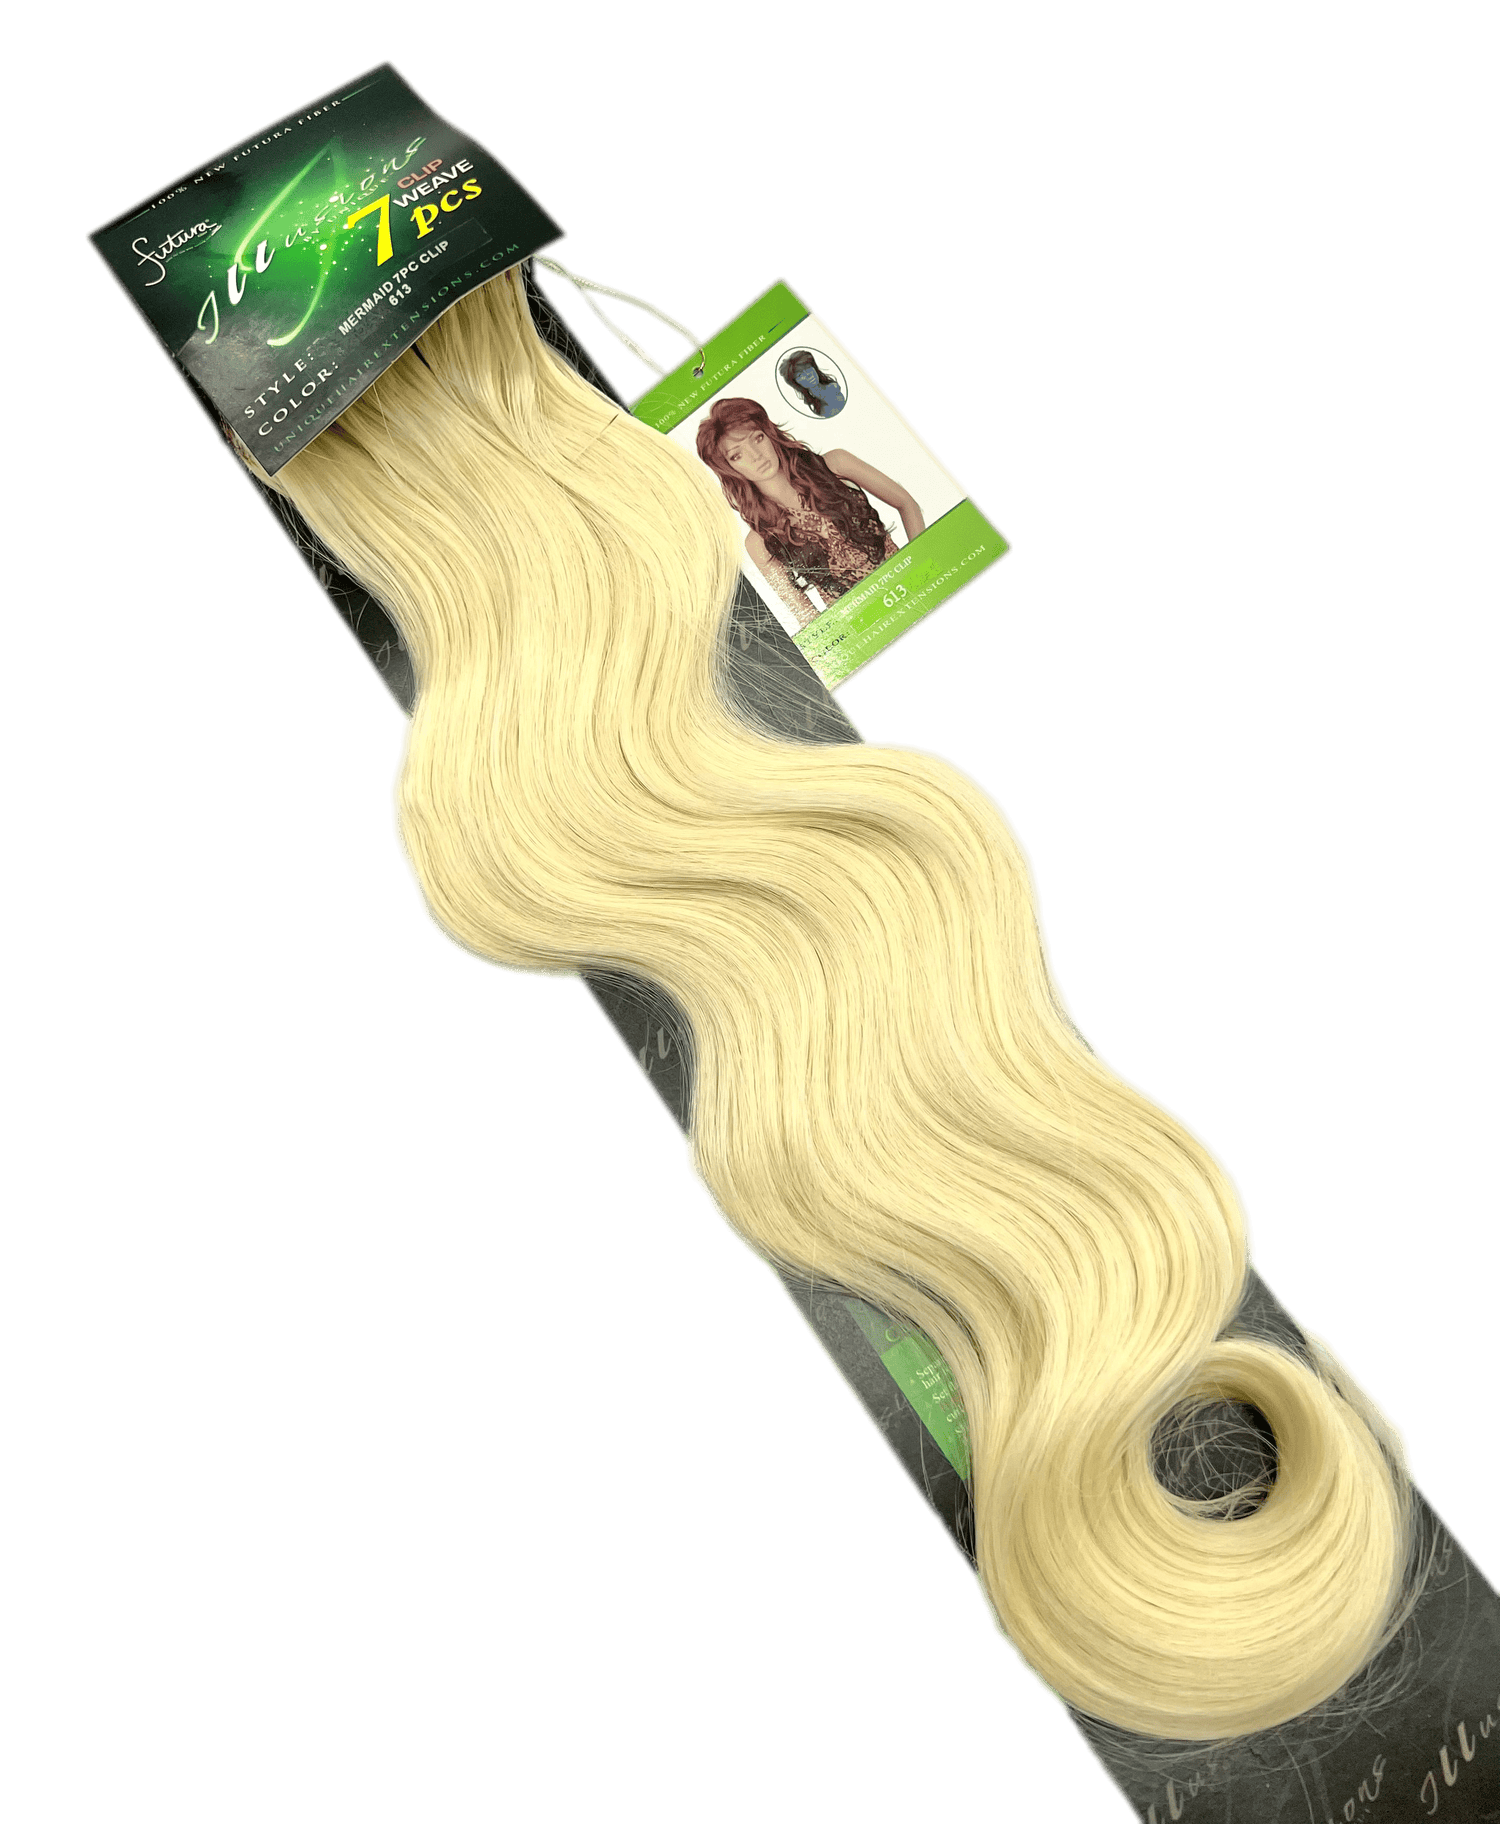 Illusions Collection Mermaid Clip (7 pieces Clip On) 22 inch - VIP Extensions